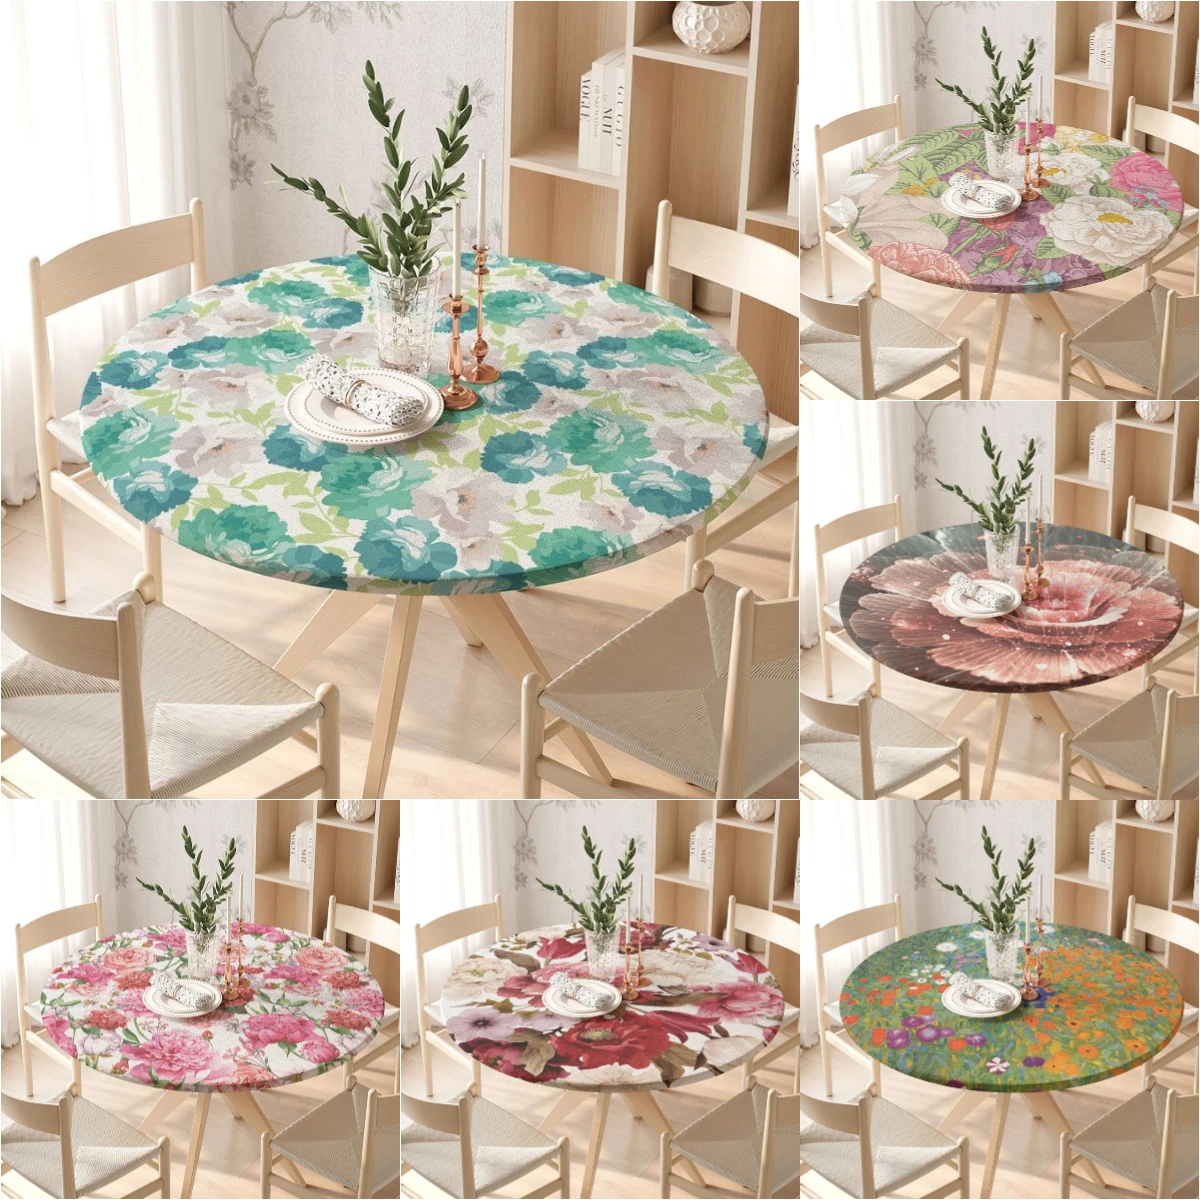 

Flower Round Tablecloth Floral Plants Fitted Elastic Edged Waterproof Polyester Table Cover for Dinning Room Kitchen Outdoor